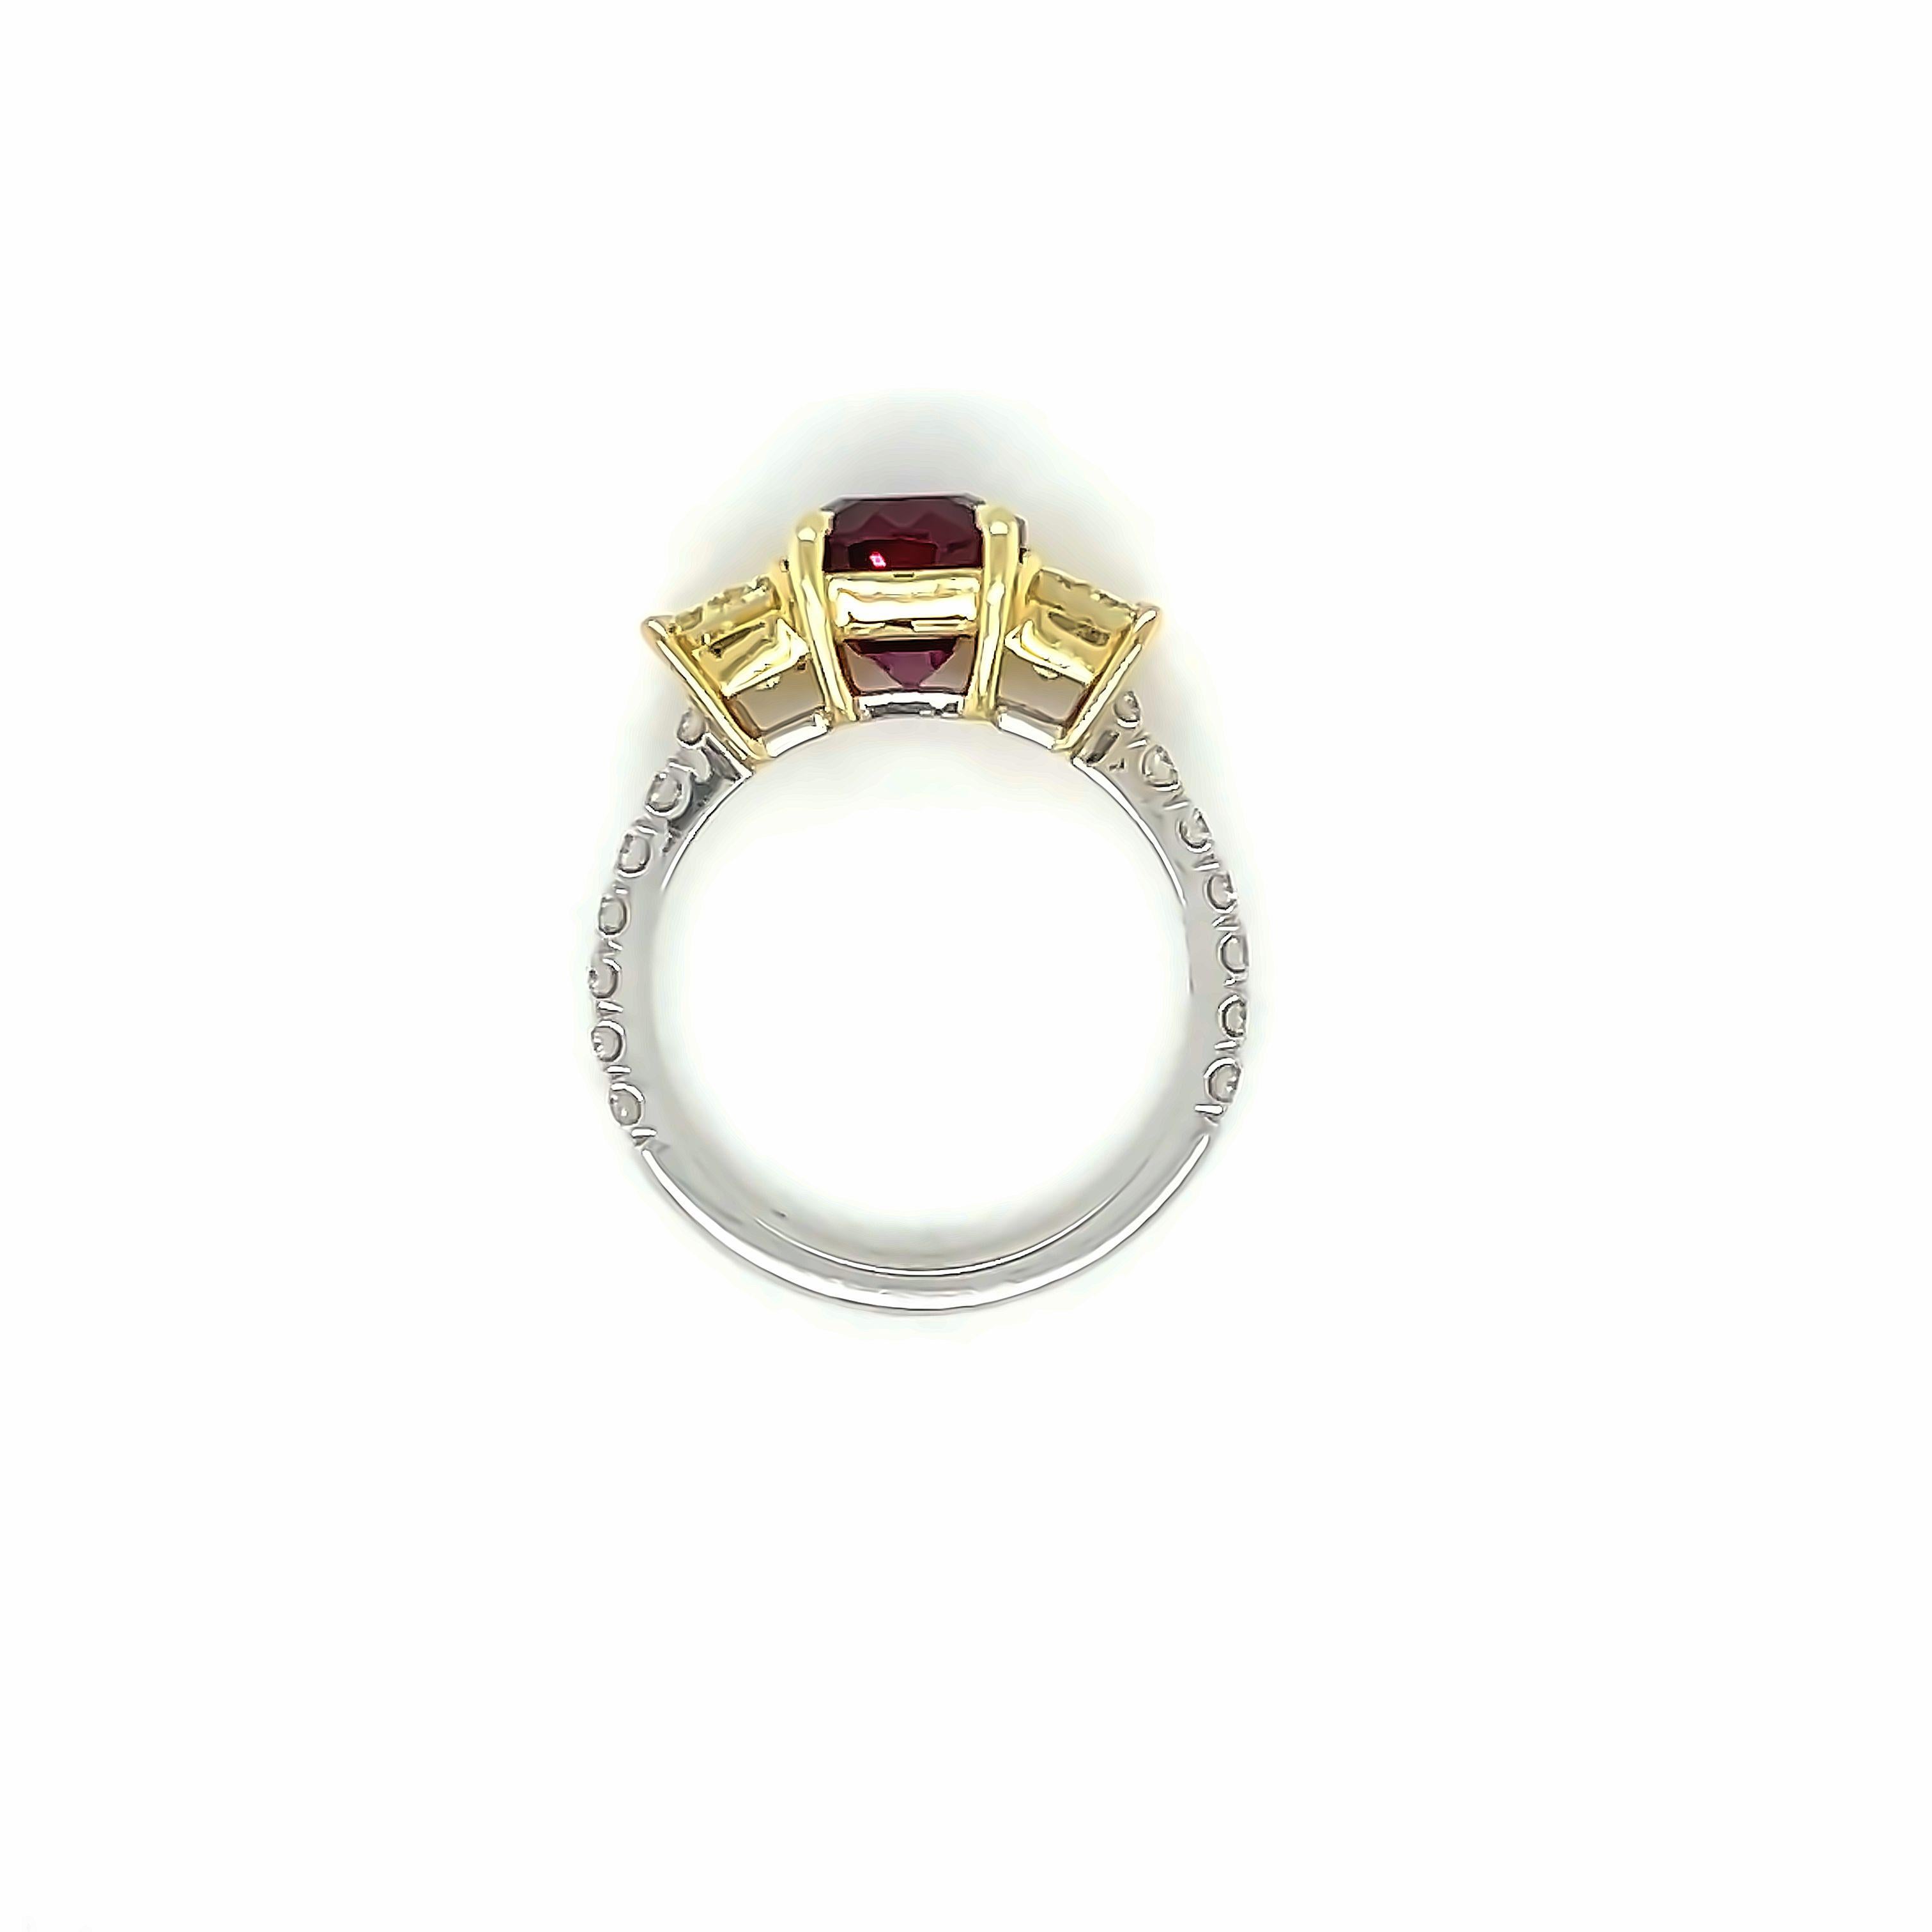 Cushion Cut Gems Are Forever Three Stone GIA Certified 3.02 ct. Natural Ruby Ring 18k Gold For Sale